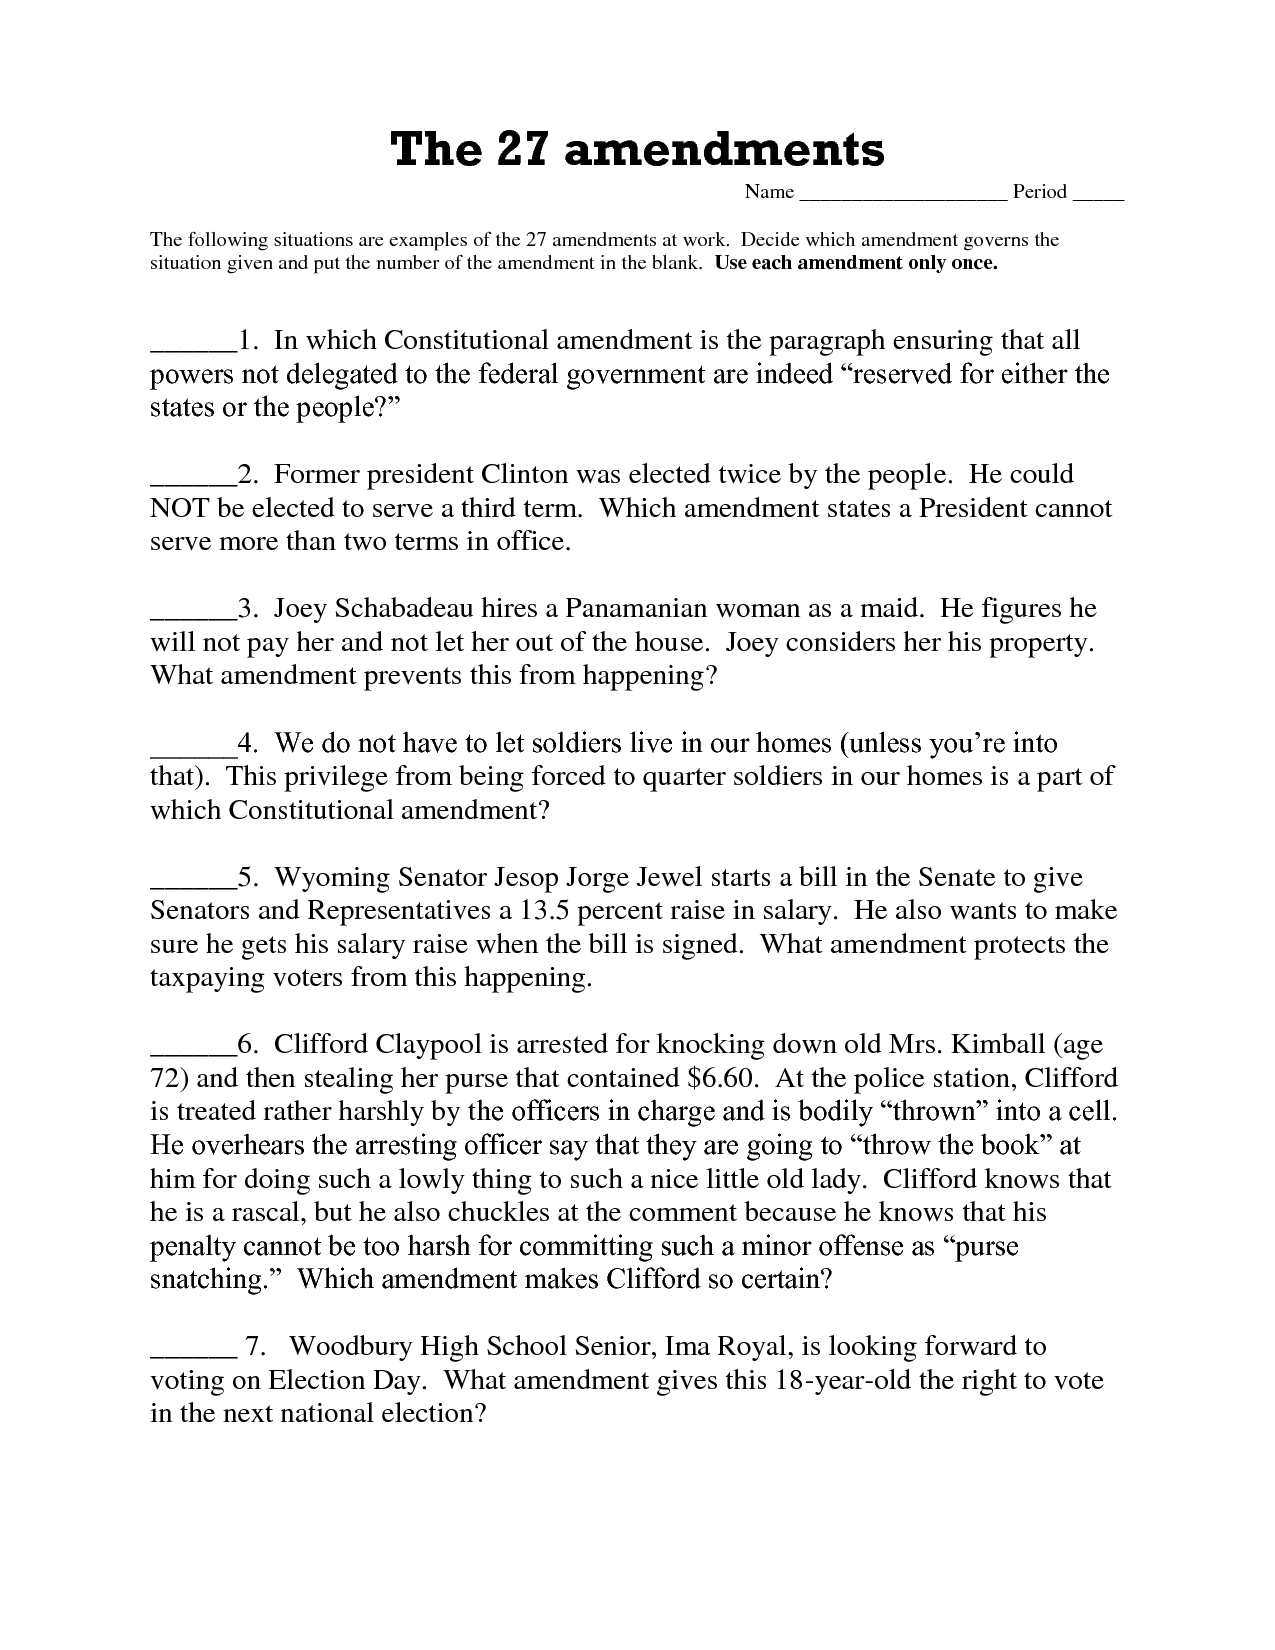 15-best-images-of-amending-the-constitution-worksheet-constitution-amendments-worksheets